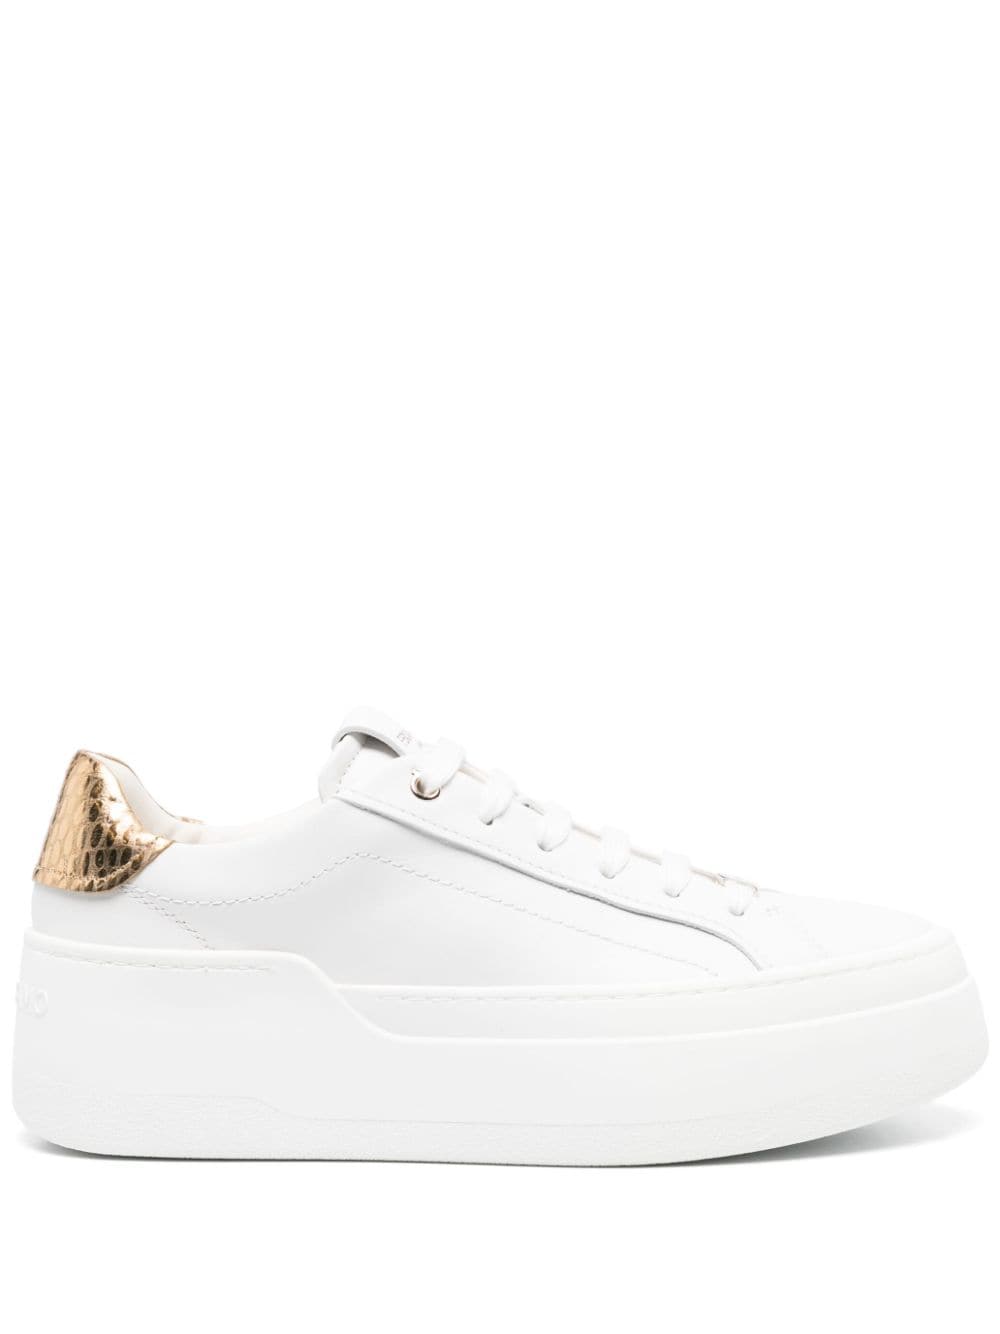 Ferragamo White Leather Platform Sneaker With Gold Accents